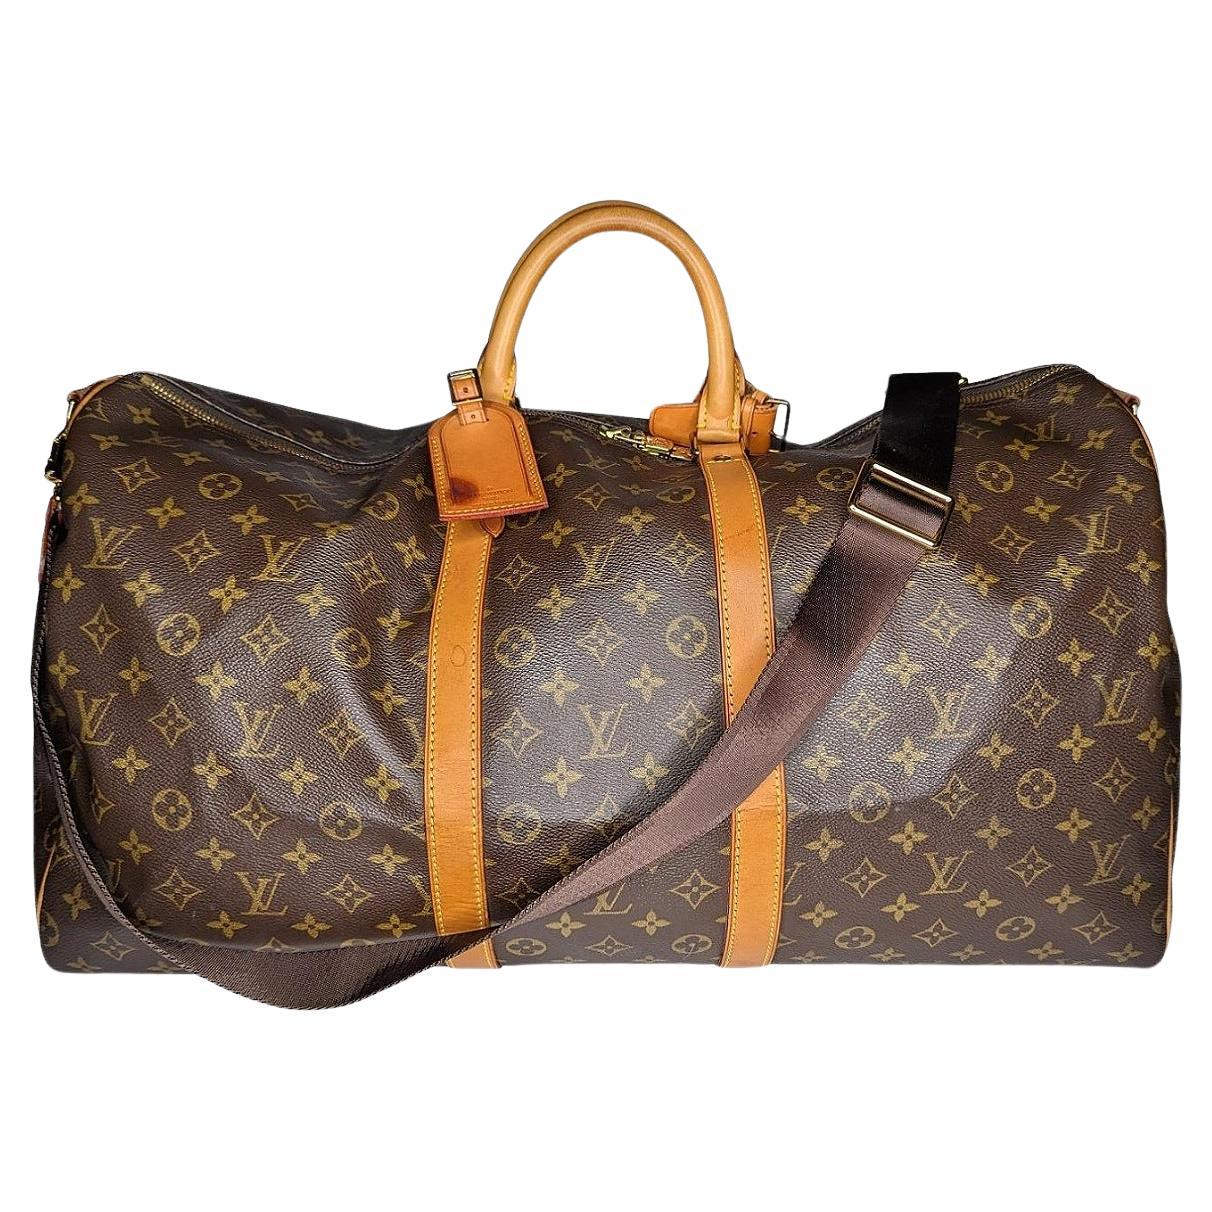 Louis Vuitton Drip Bag - 3 For Sale on 1stDibs